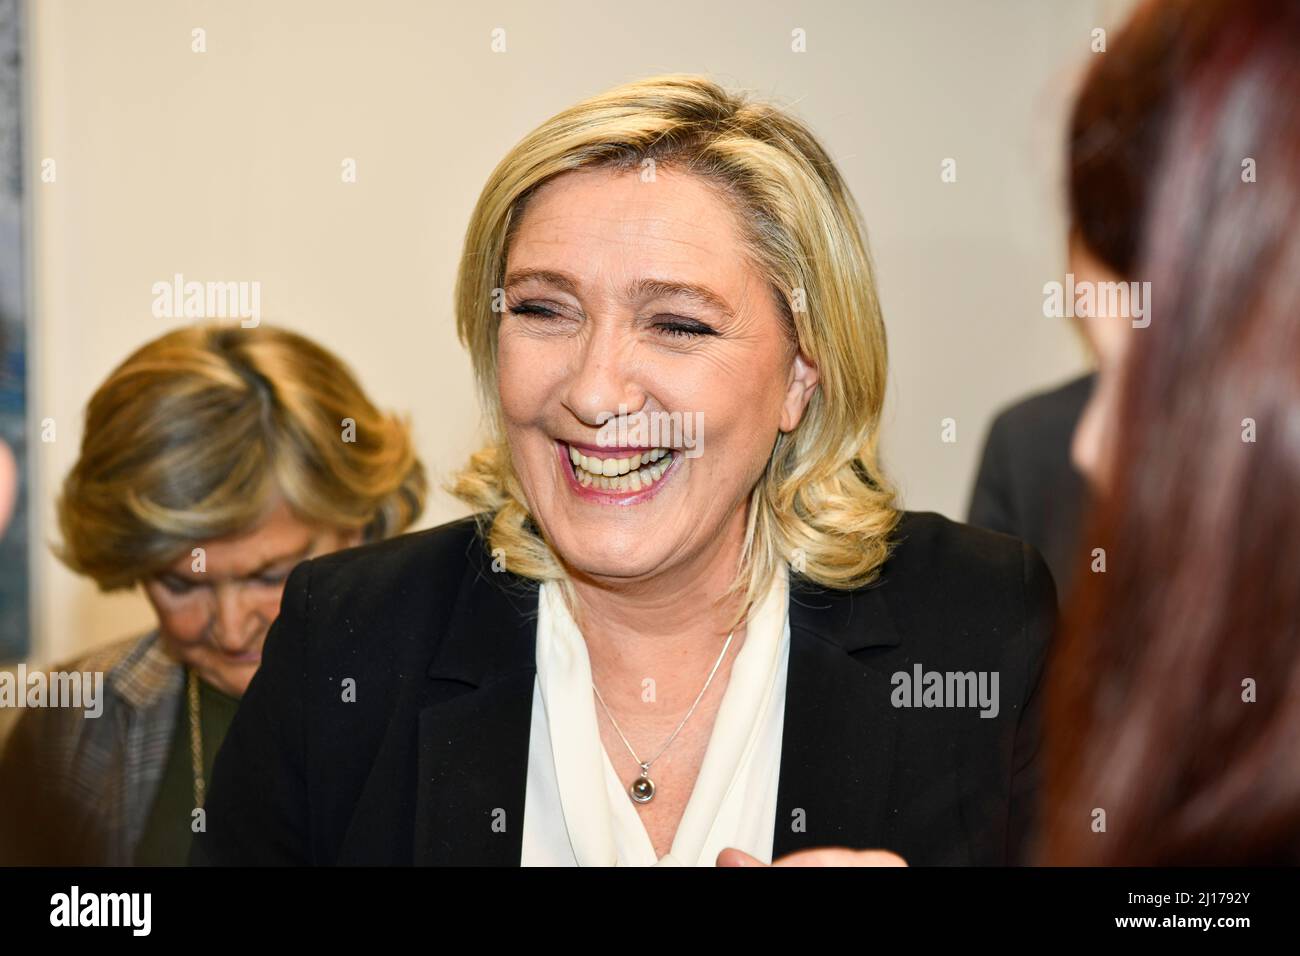 Marine Le Pen, candidate of the political party 'le Rassemblement National' (RN) for the French presidential election laughs, during an event where sh Stock Photo